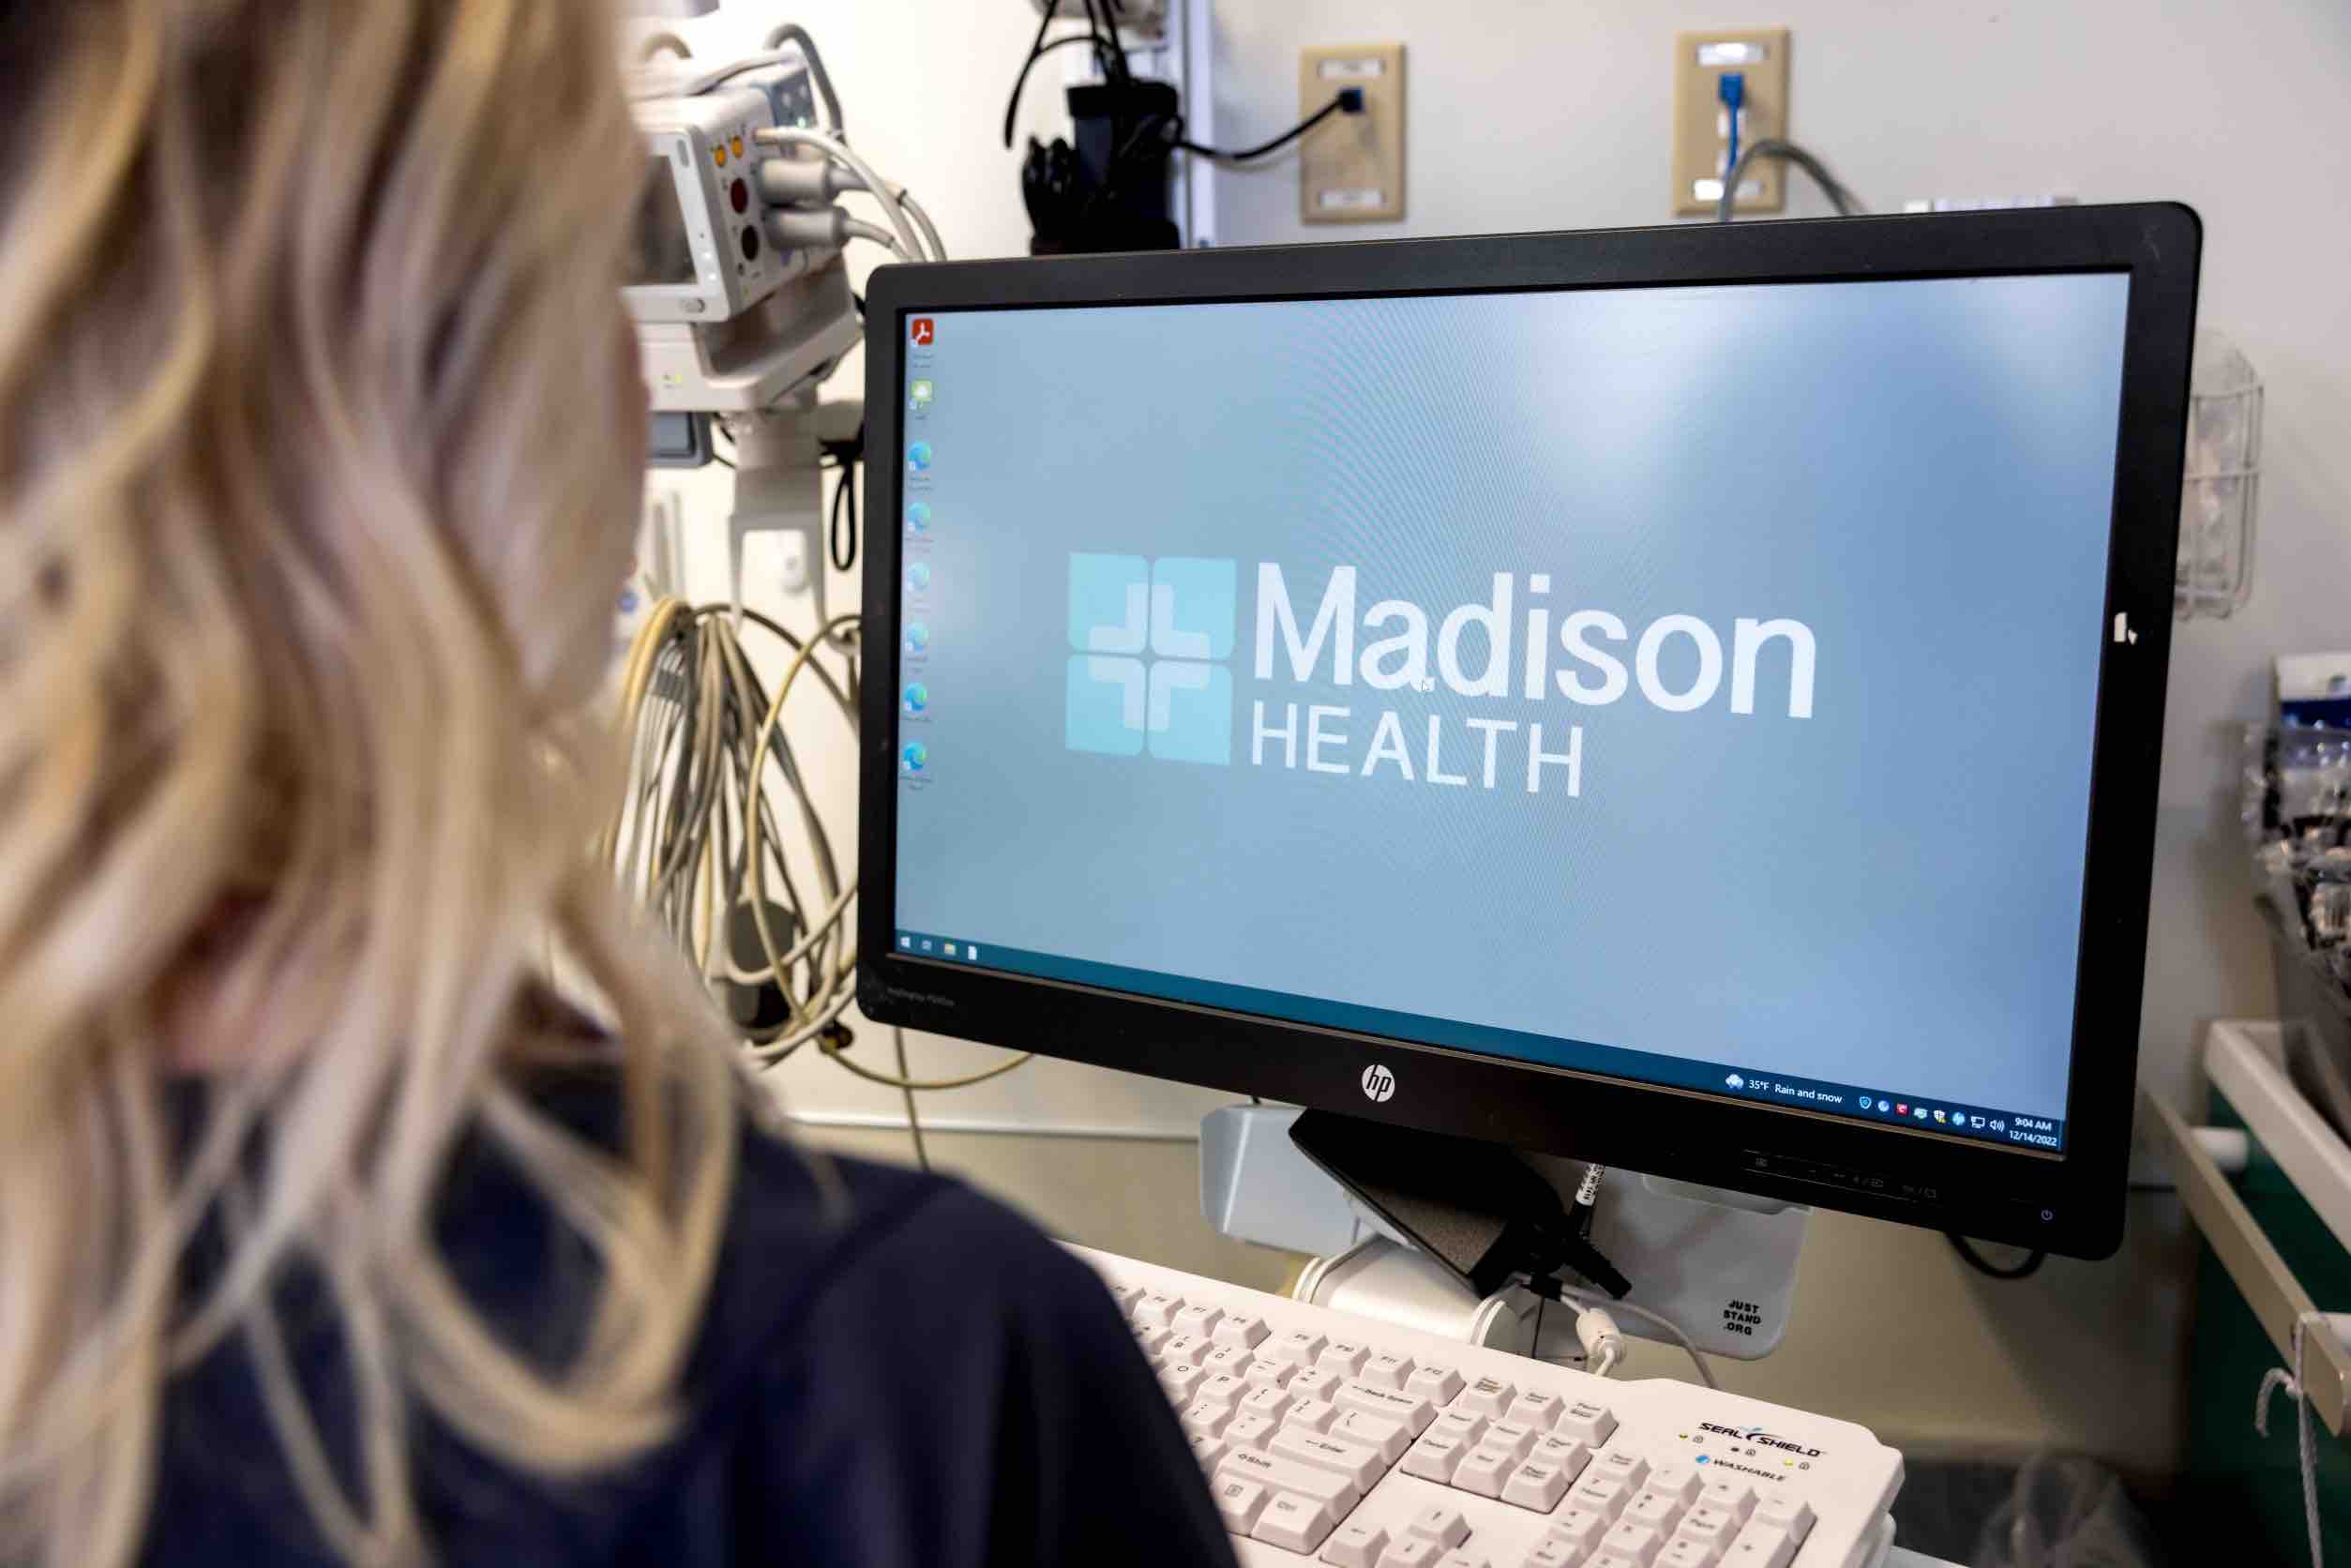 Madison Health Clinician provider looking at computer that has the Madison Health logo on it